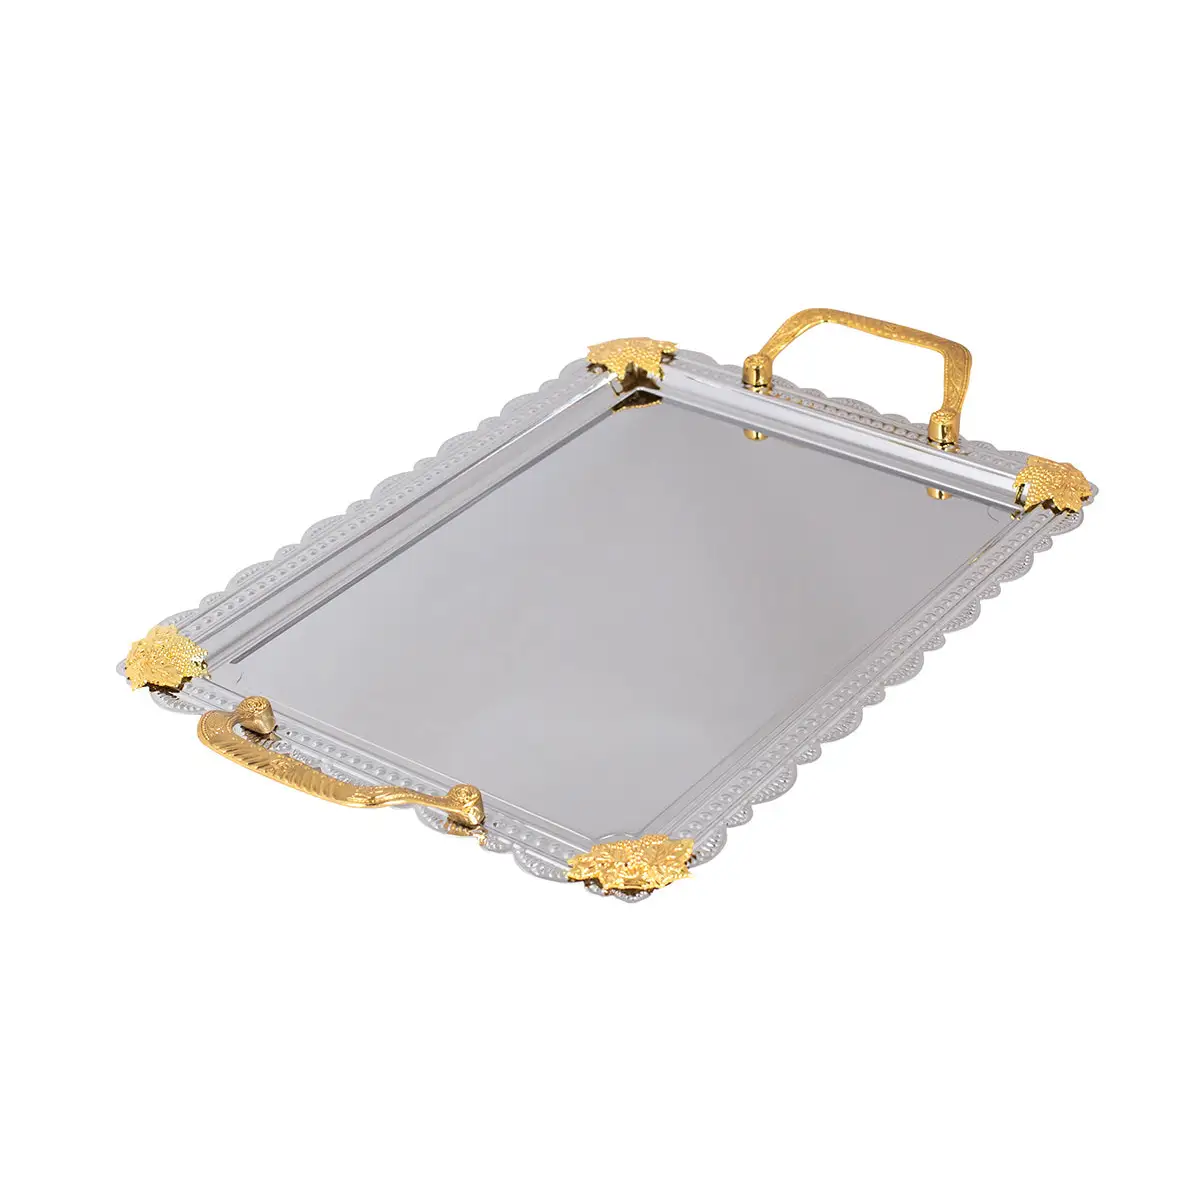 CHROME PLATED IRON RECT TRAY WITH GOLD HANDLE - TRAY